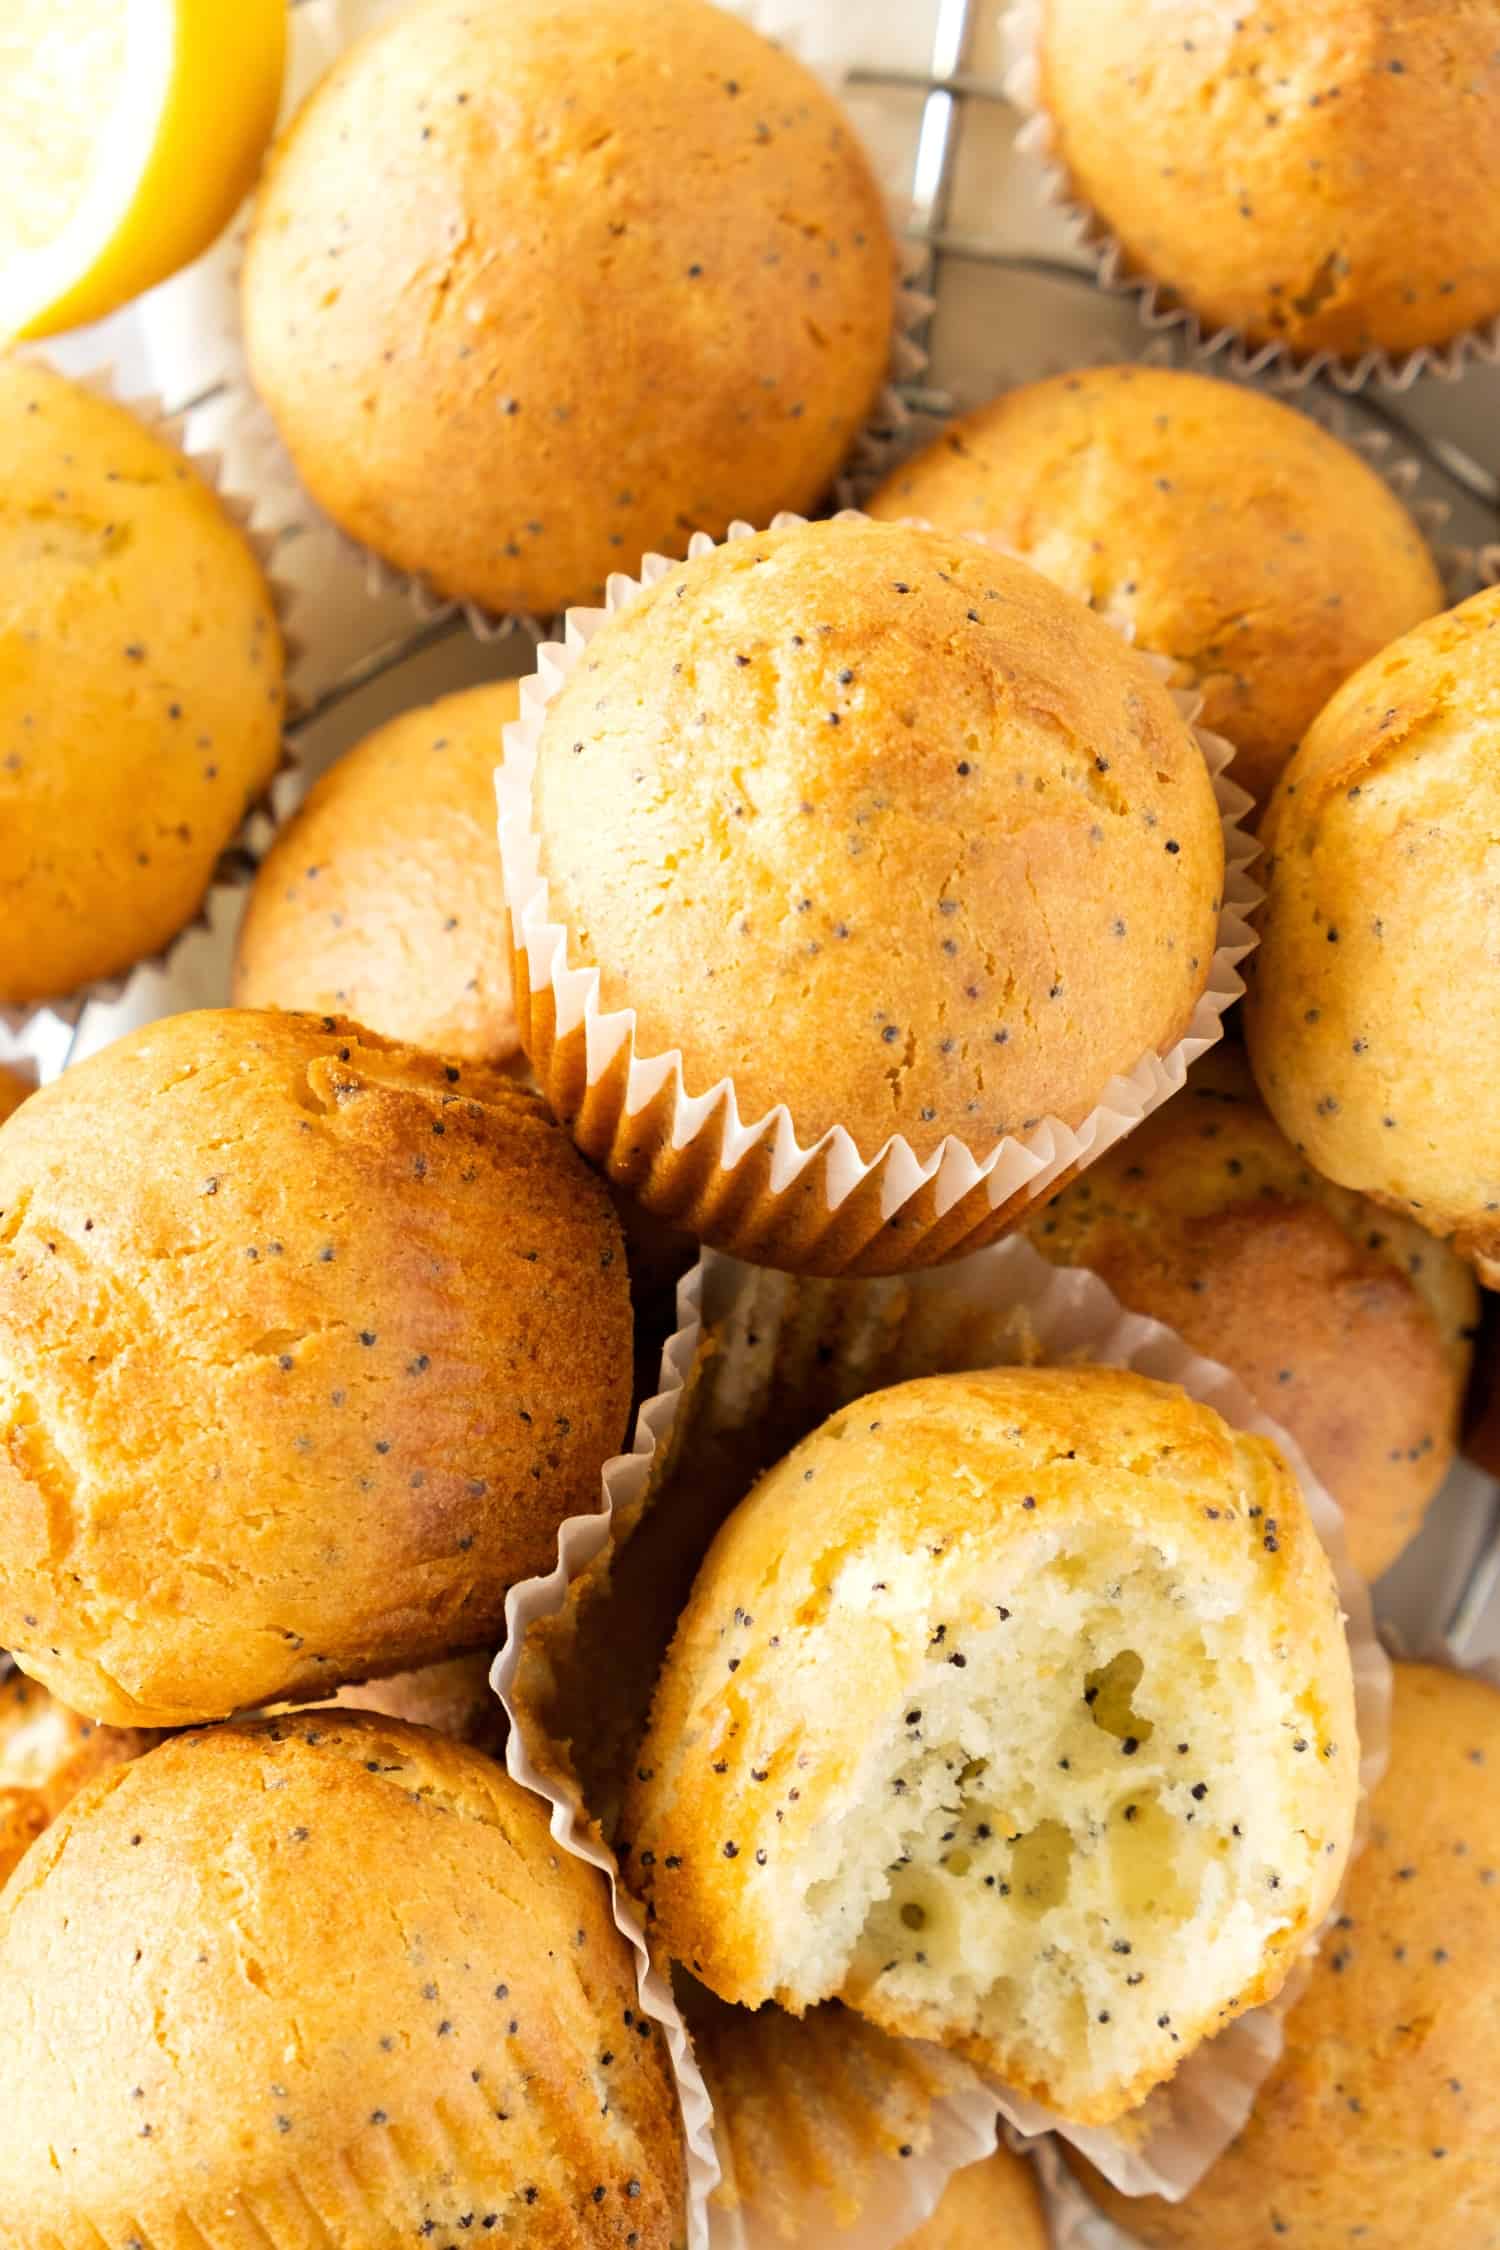 Up close view of many gf lemon poppy seed muffins.